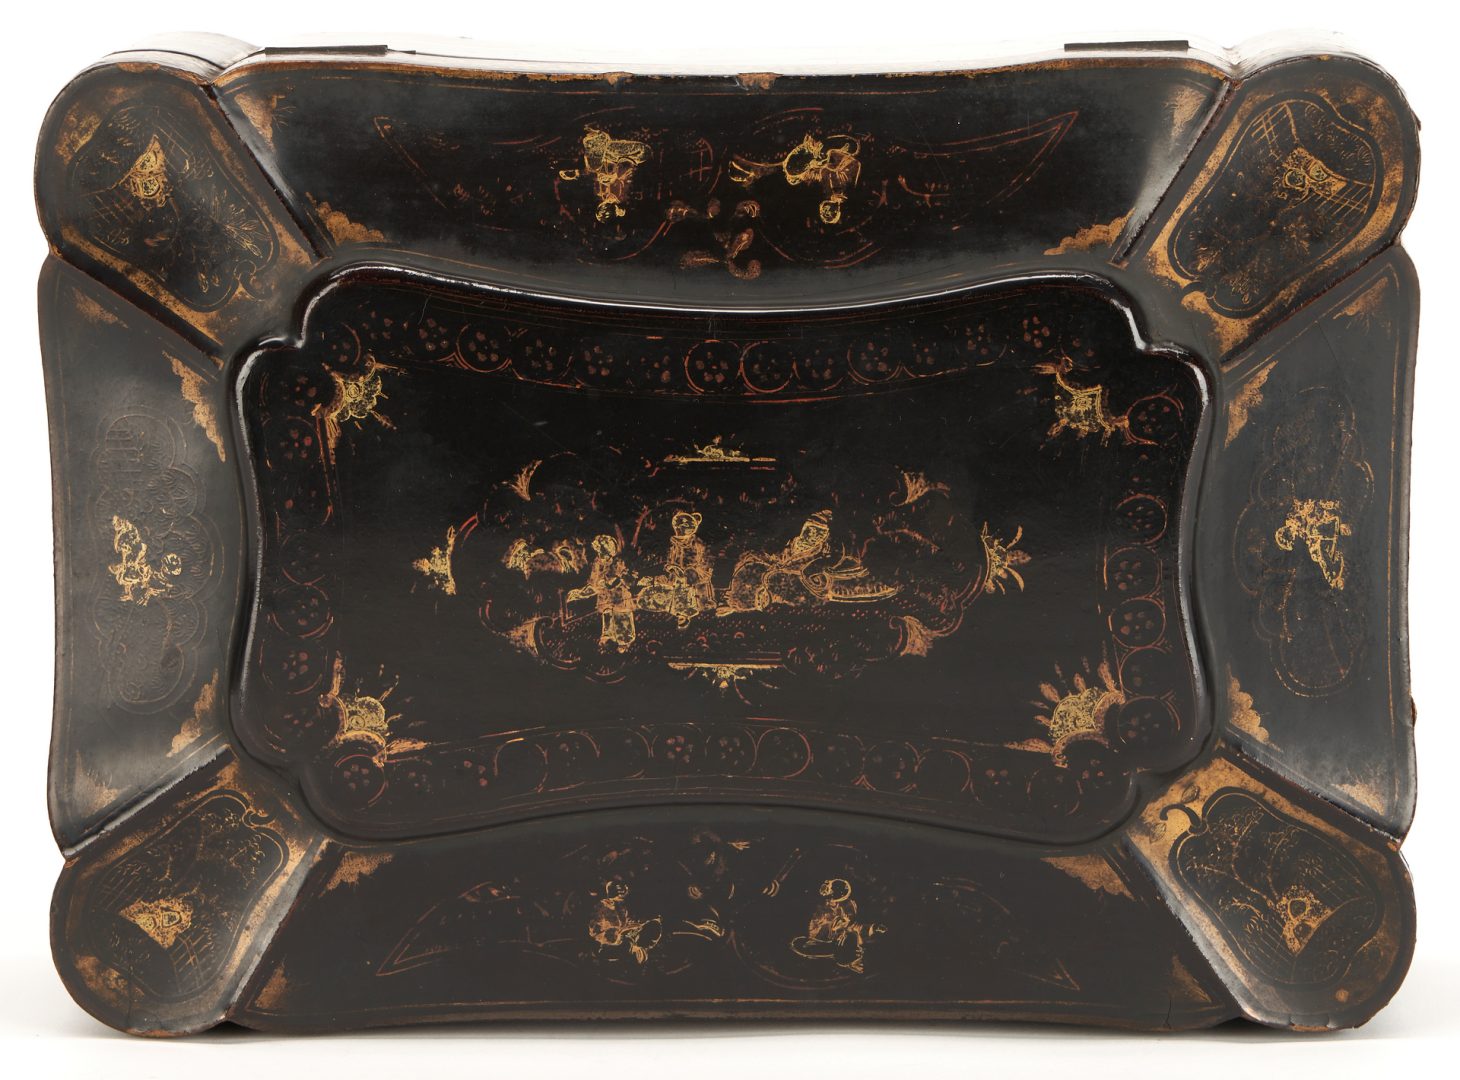 Lot 13: Two (2) Chinese Export Lacquer Boxes